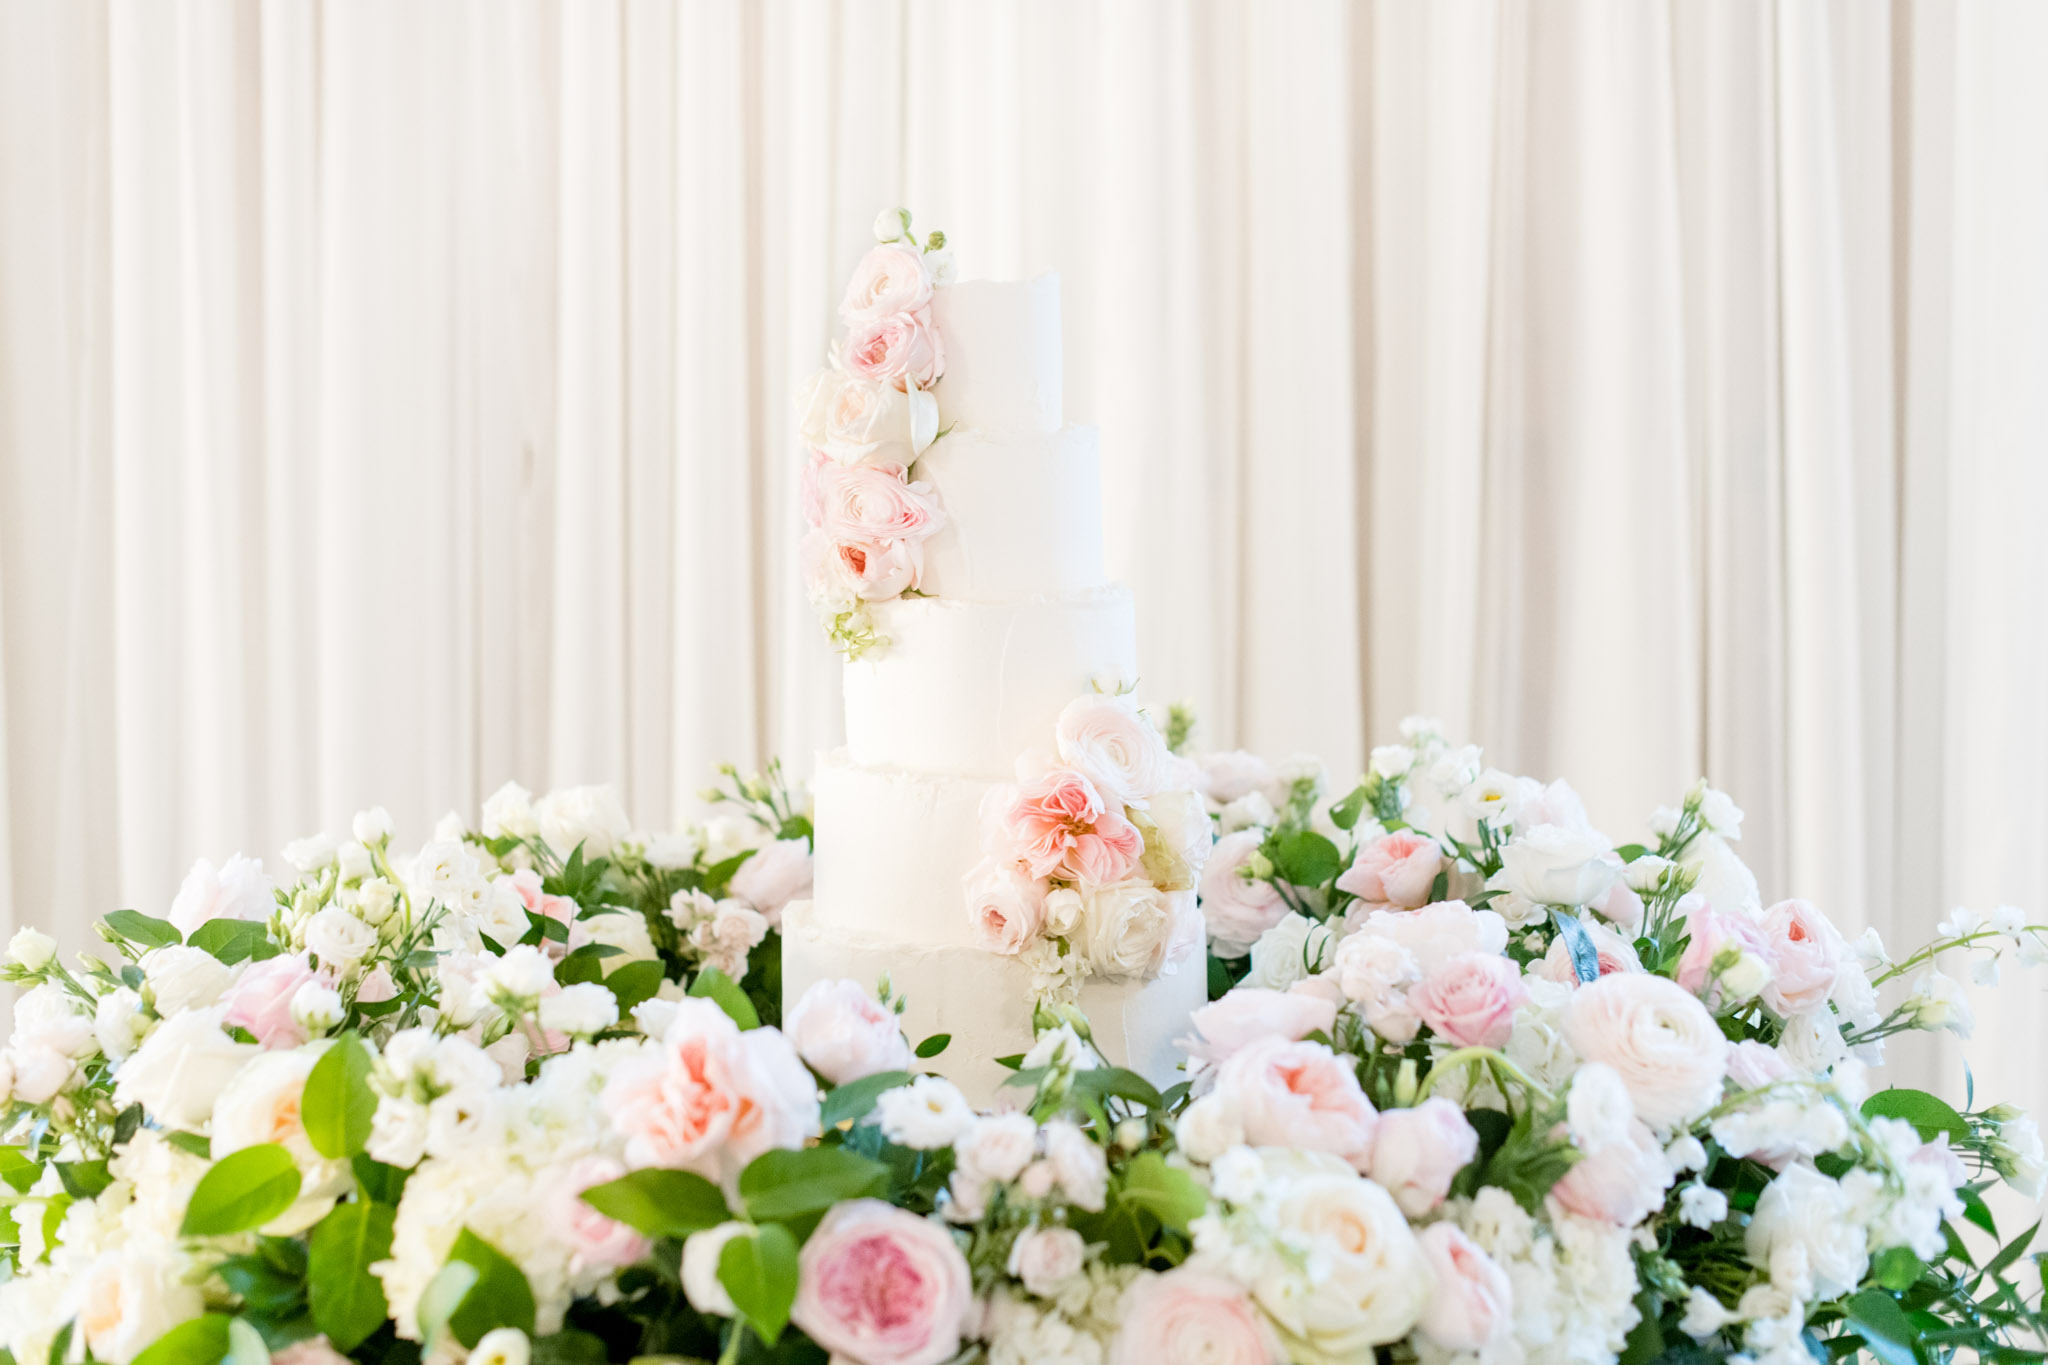 White cake with pink flowers sits on table at reception.